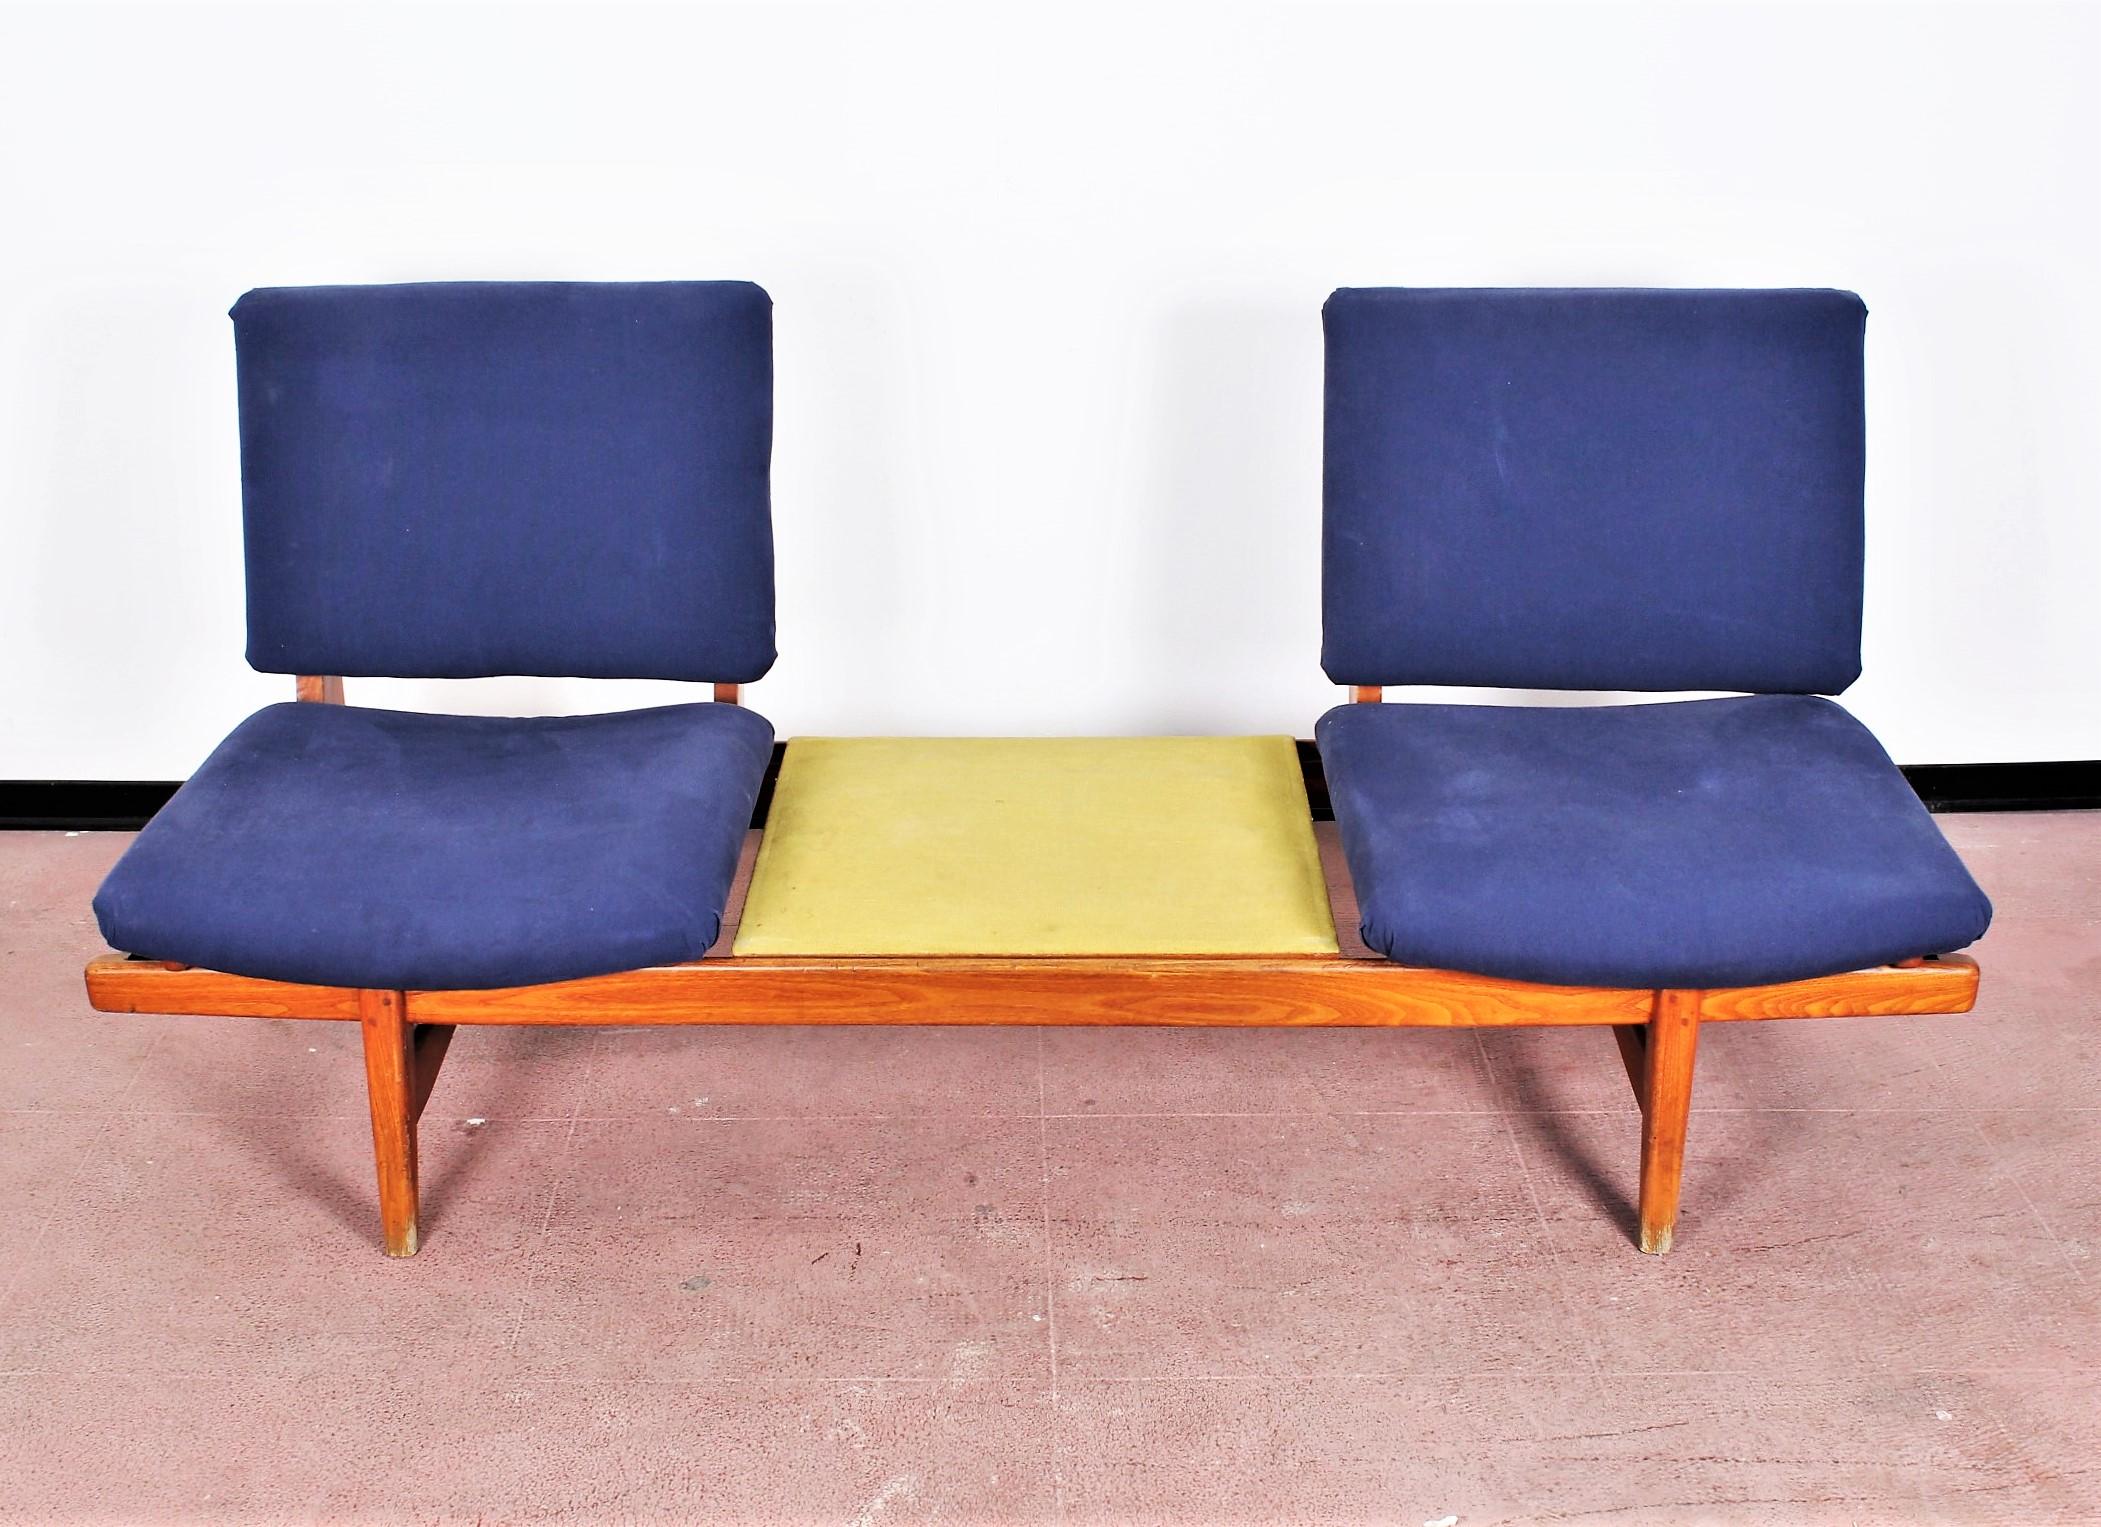 Very beautiful wood and yellow / blue fabric modular two-seater bench sofa with top. Attributed to La Permanente Mobili Cantù 1960s Italy
Wear consistent with age and use.